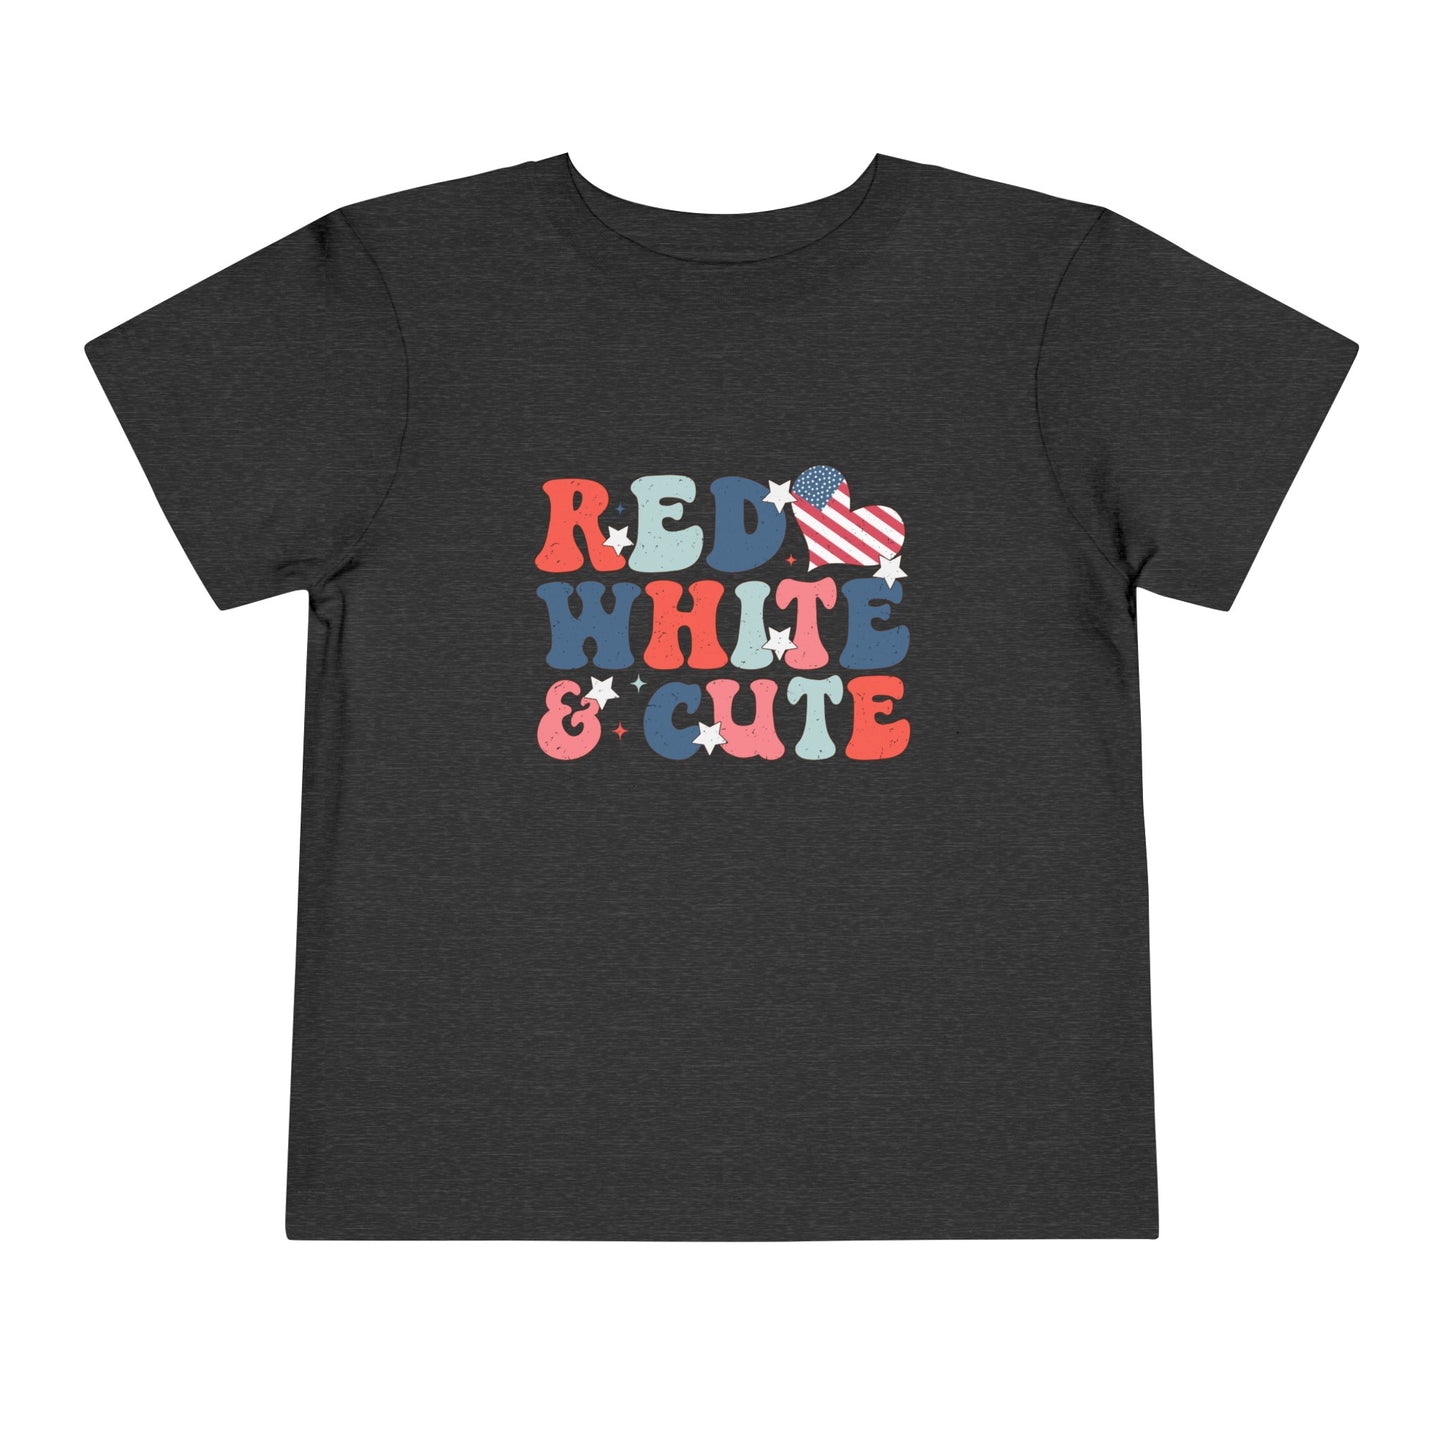 Red White & Cute America 4th of July Toddler Short Sleeve Tee